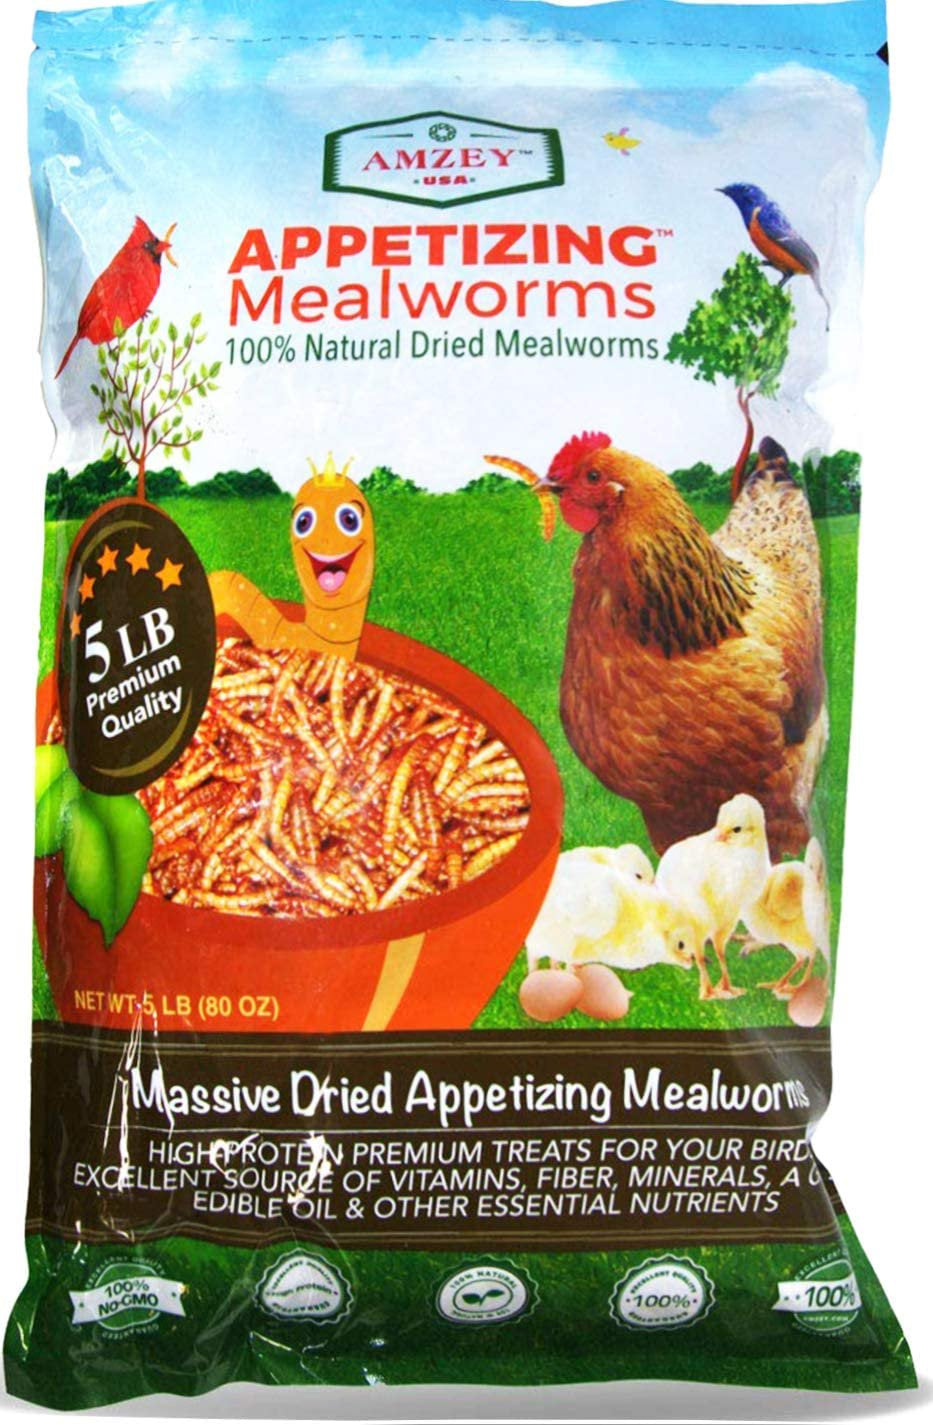 Amzey Freeze Dried Mealworms 2LBS, 100% Natural Non-Gmo, High-Protein Mealworms for Birds, Chicken Treats, Ducks, Wild Birds, Reptiles Animals & Pet Supplies > Pet Supplies > Bird Supplies > Bird Treats AMZEY 5 lbs  